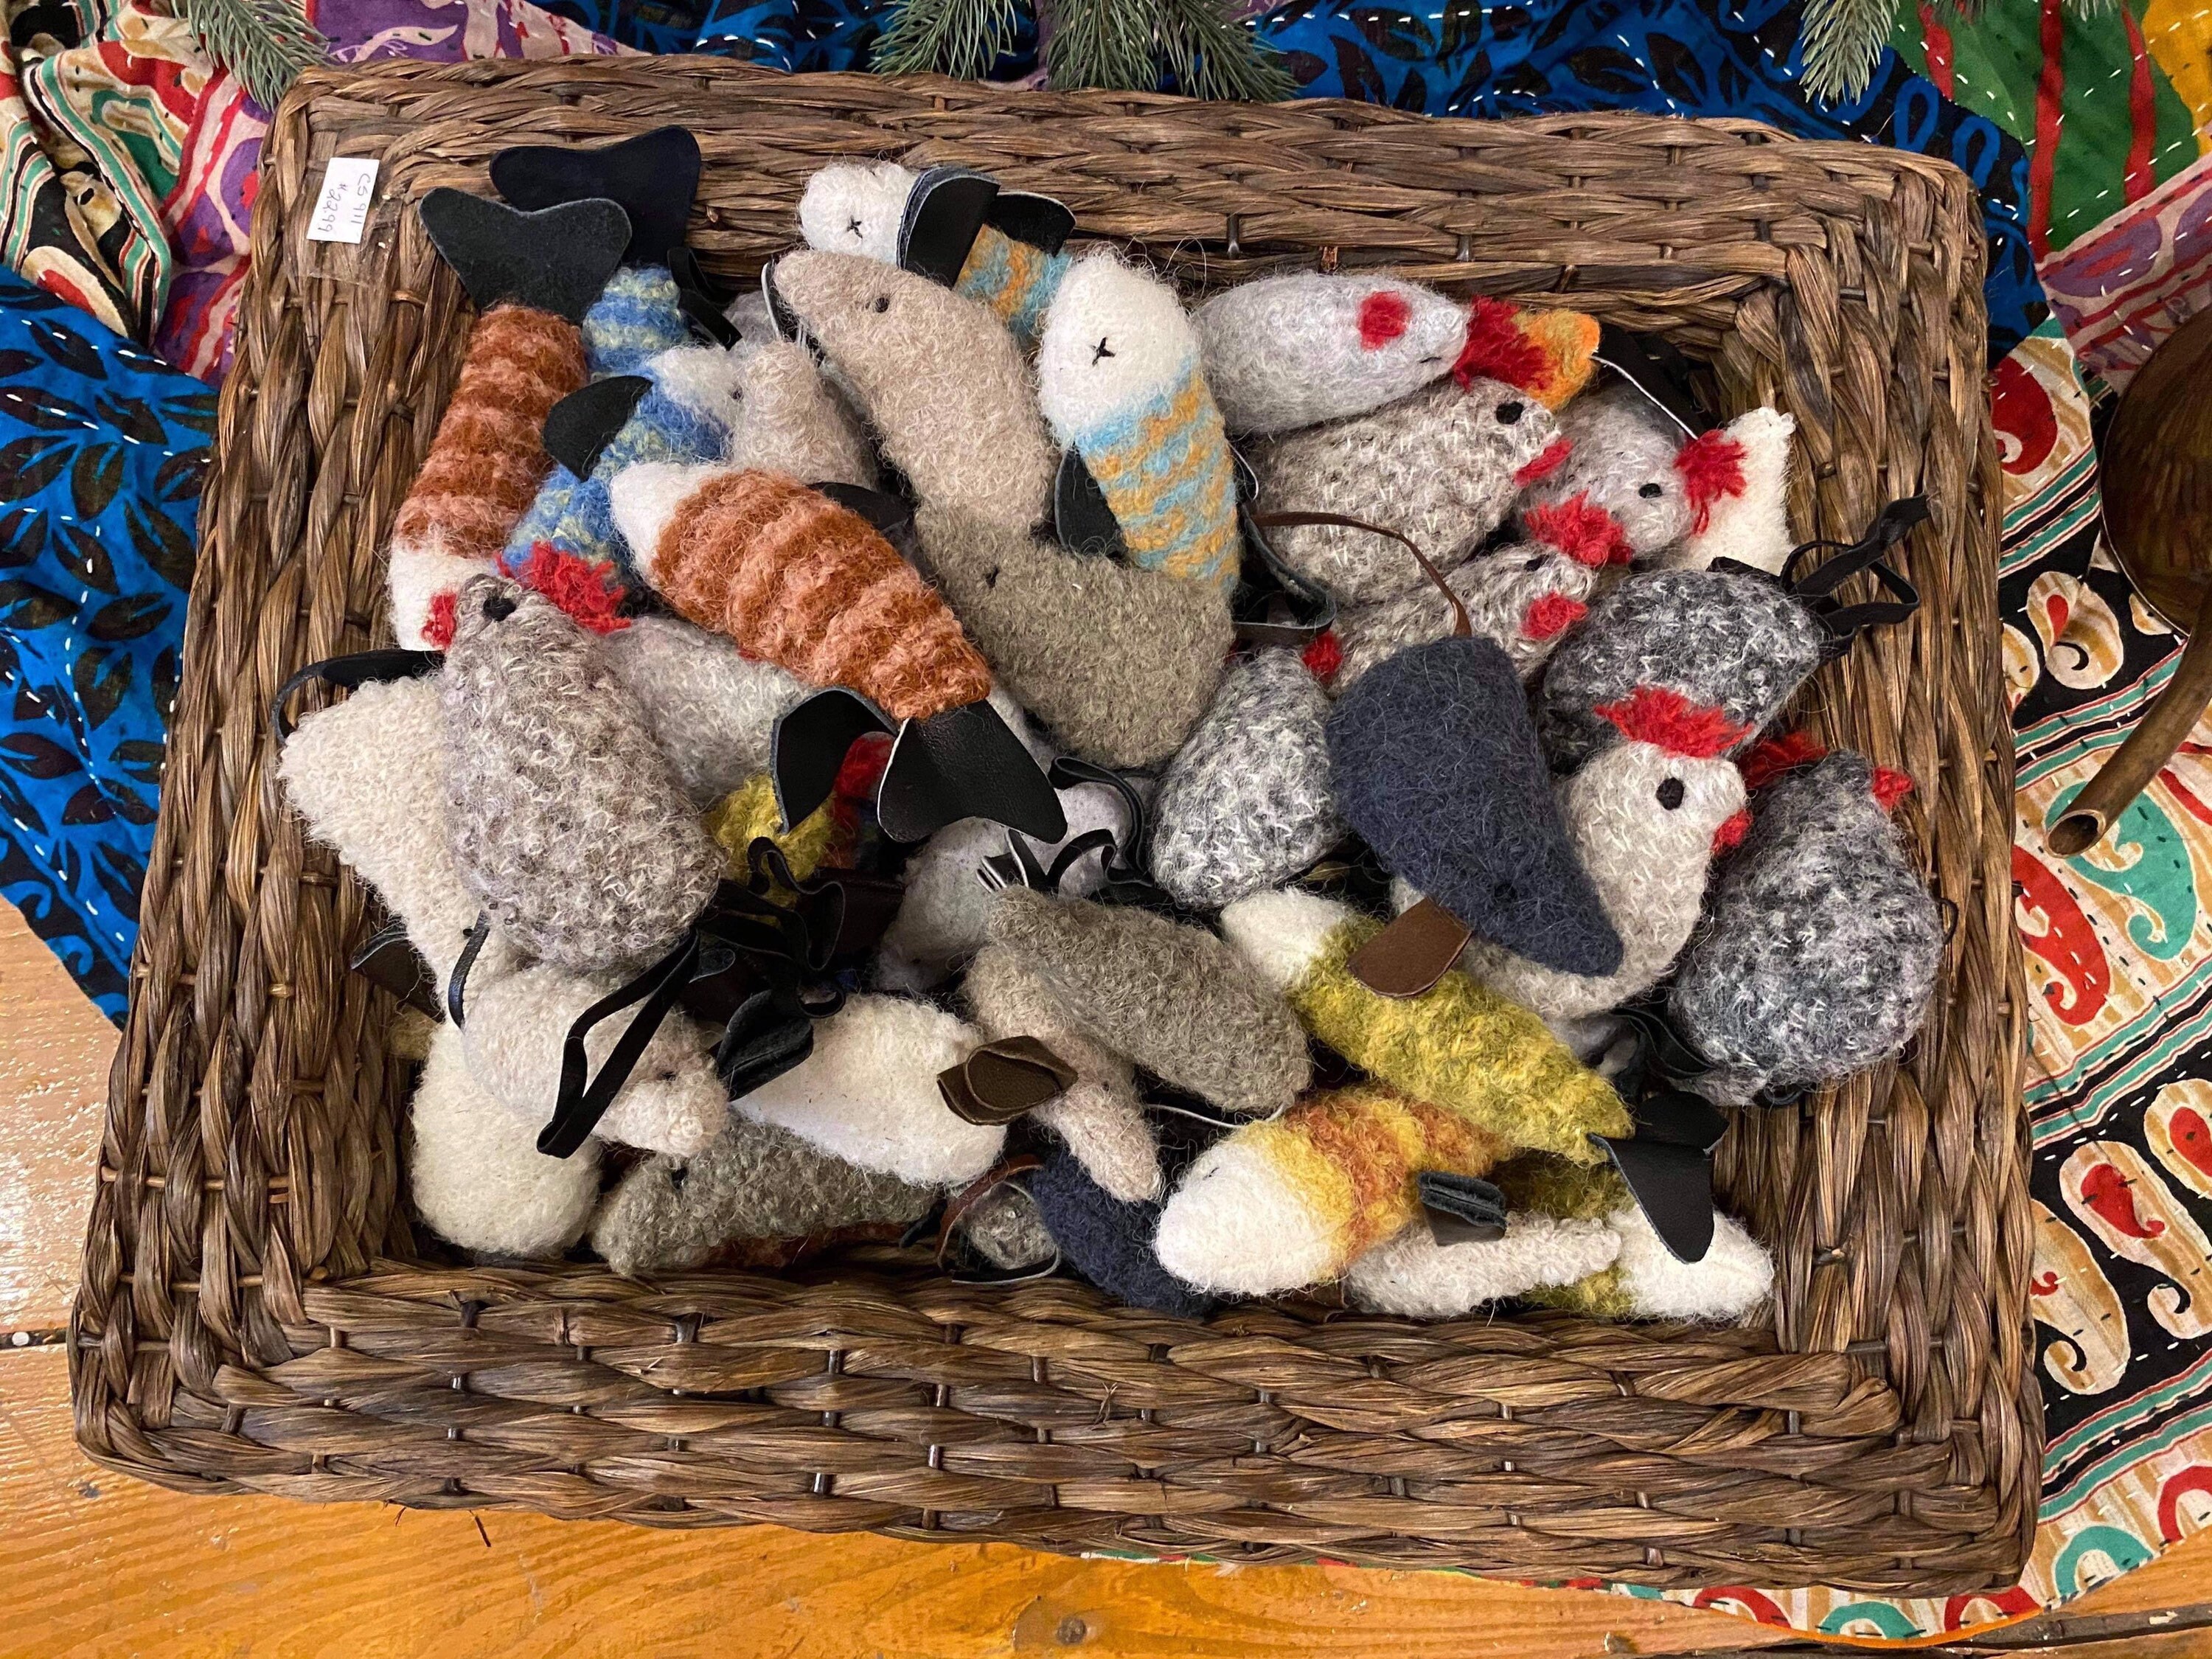 Hand-crafted 90% Alpaca Wool Cat Feline Pet Crinkle Toys, Mice Chicks Fish,  Sizes Vary, Fair Trade From Peru 